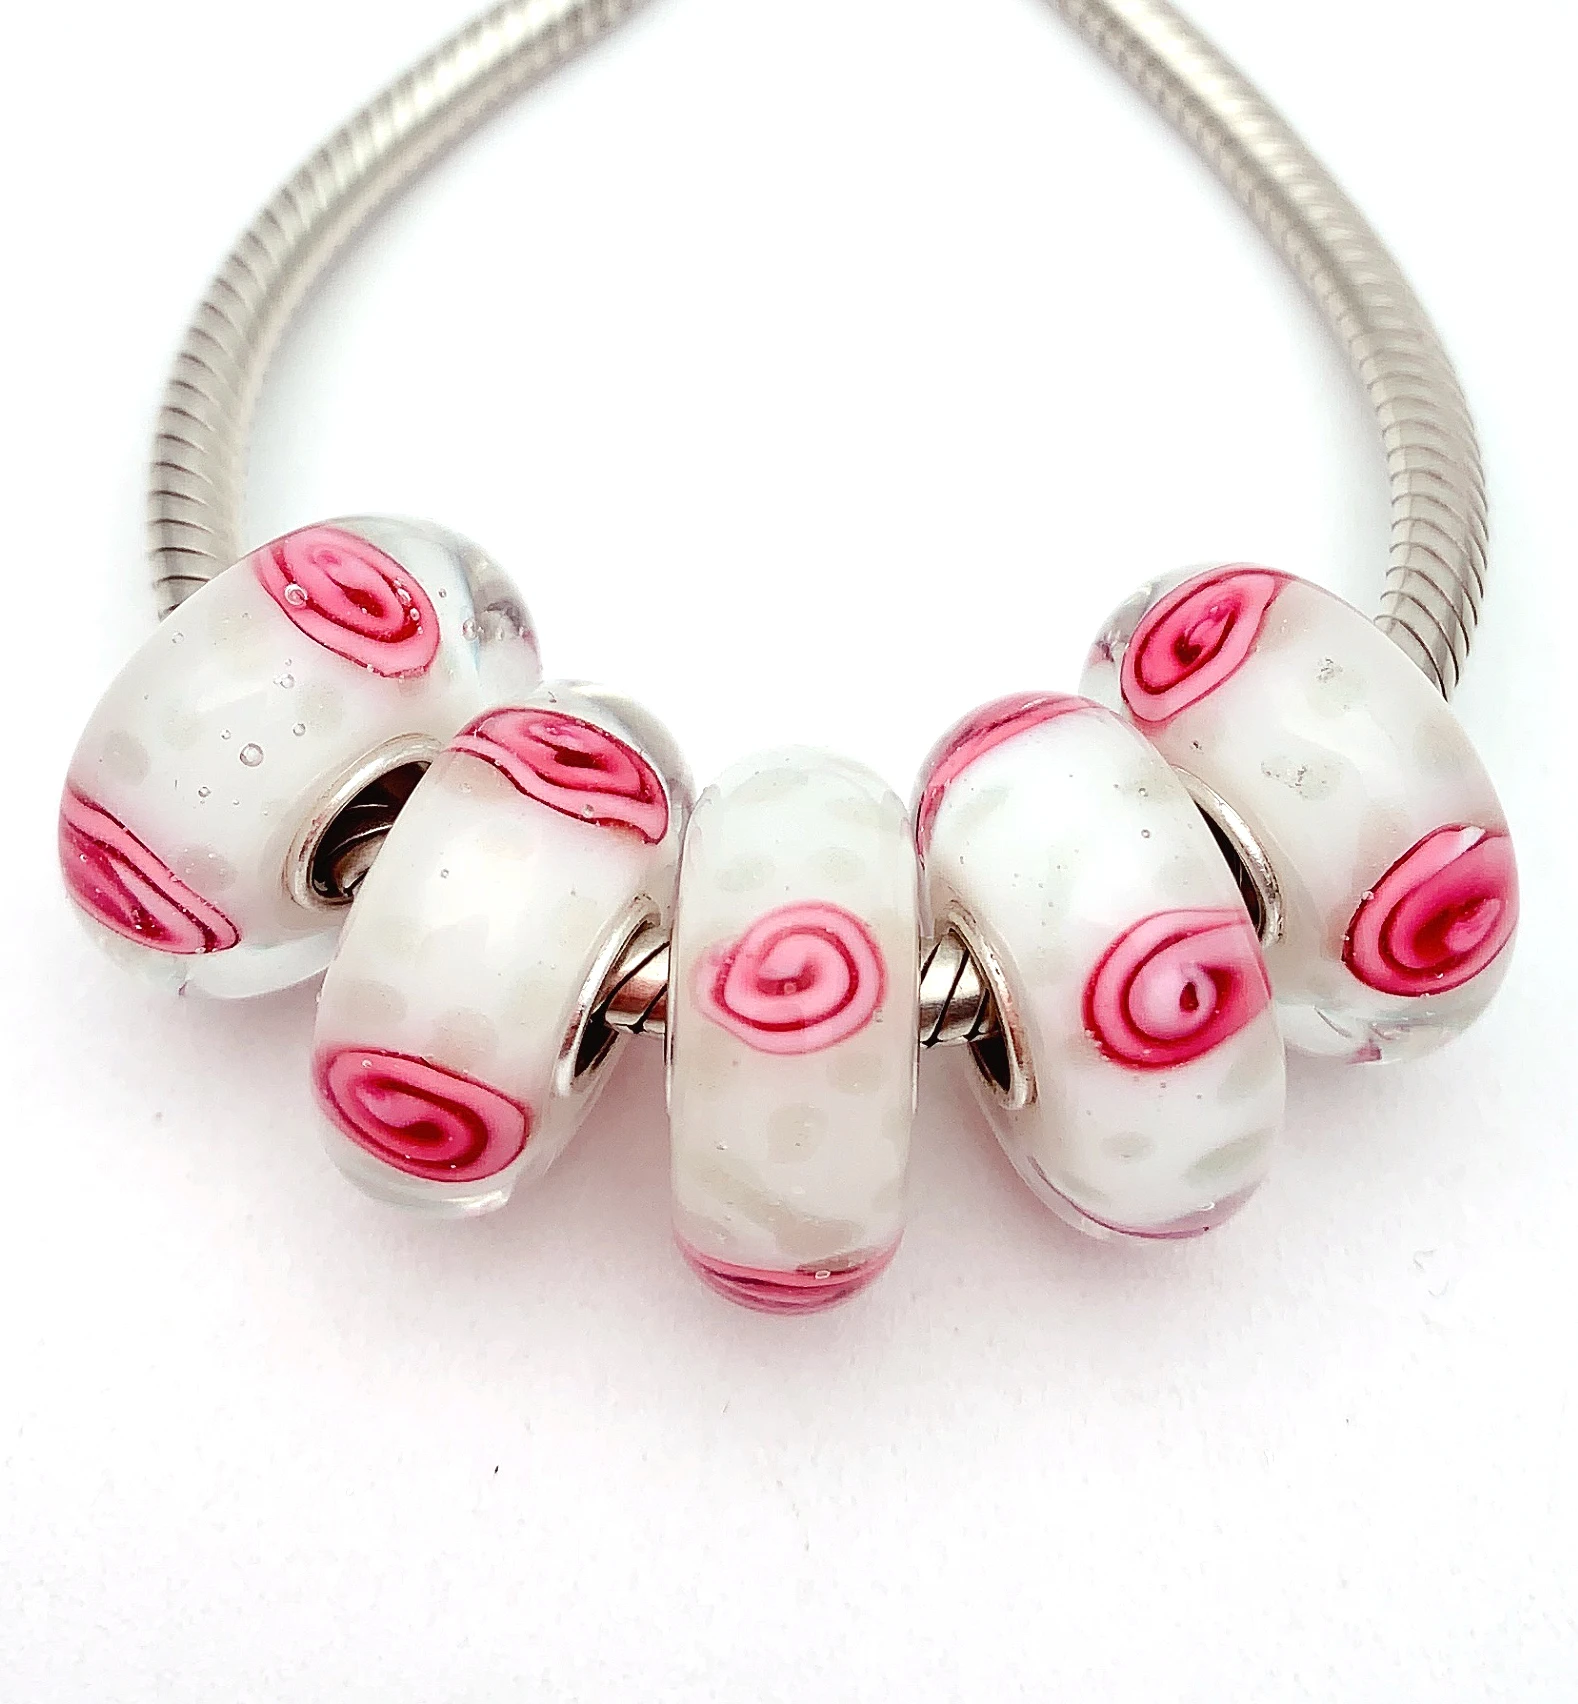 

YG512 5X 100% Authenticity S925 Sterling Silver Beads Murano Glassbeads NEW Fit European Charms Bracelet Diy Jewelry Lampwork